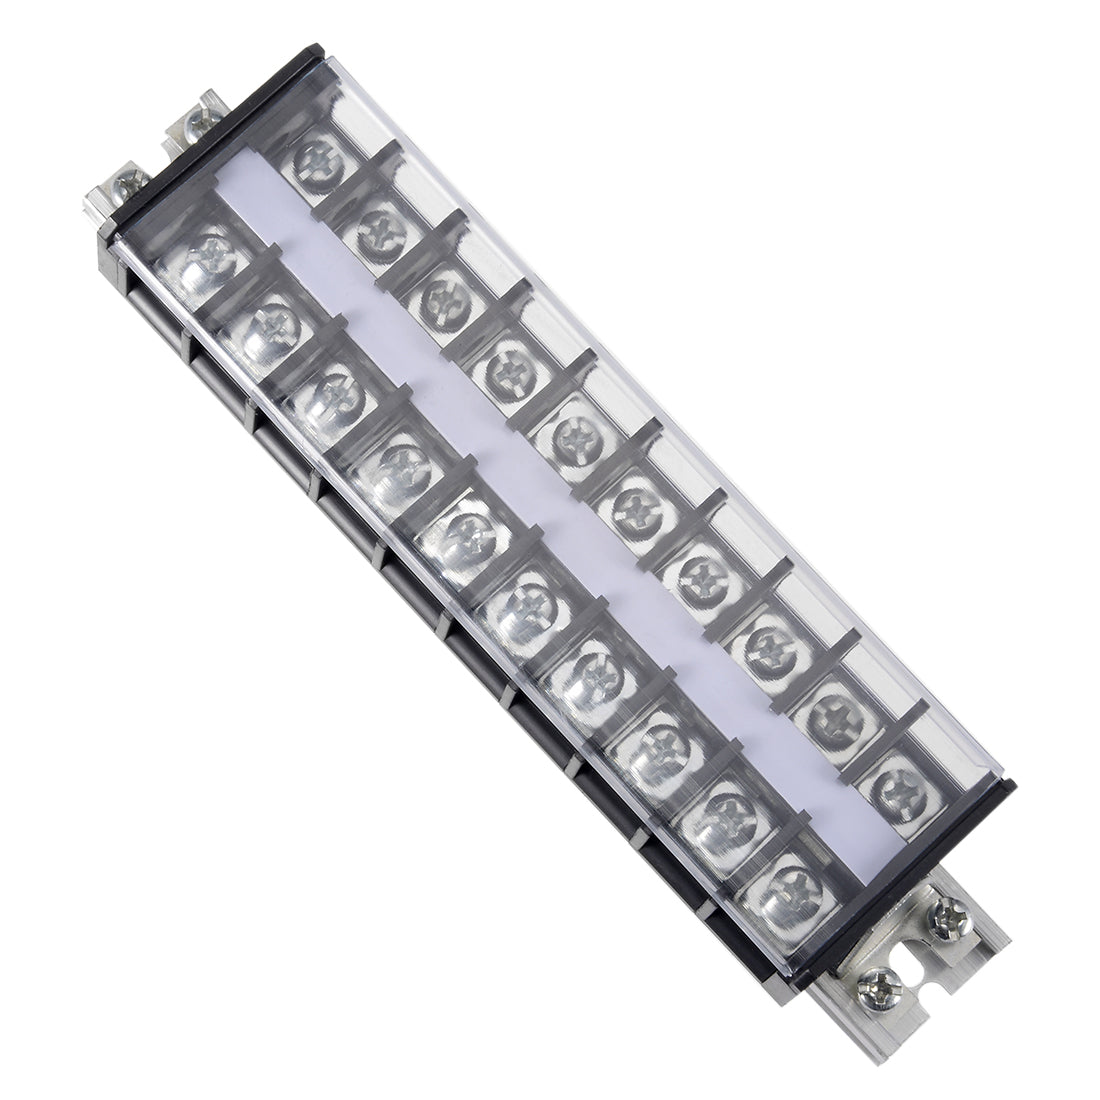 uxcell Uxcell Barrier Terminal Strip Block 660V 30A Dual Rows 10P DIN Rail Base Screw Connector